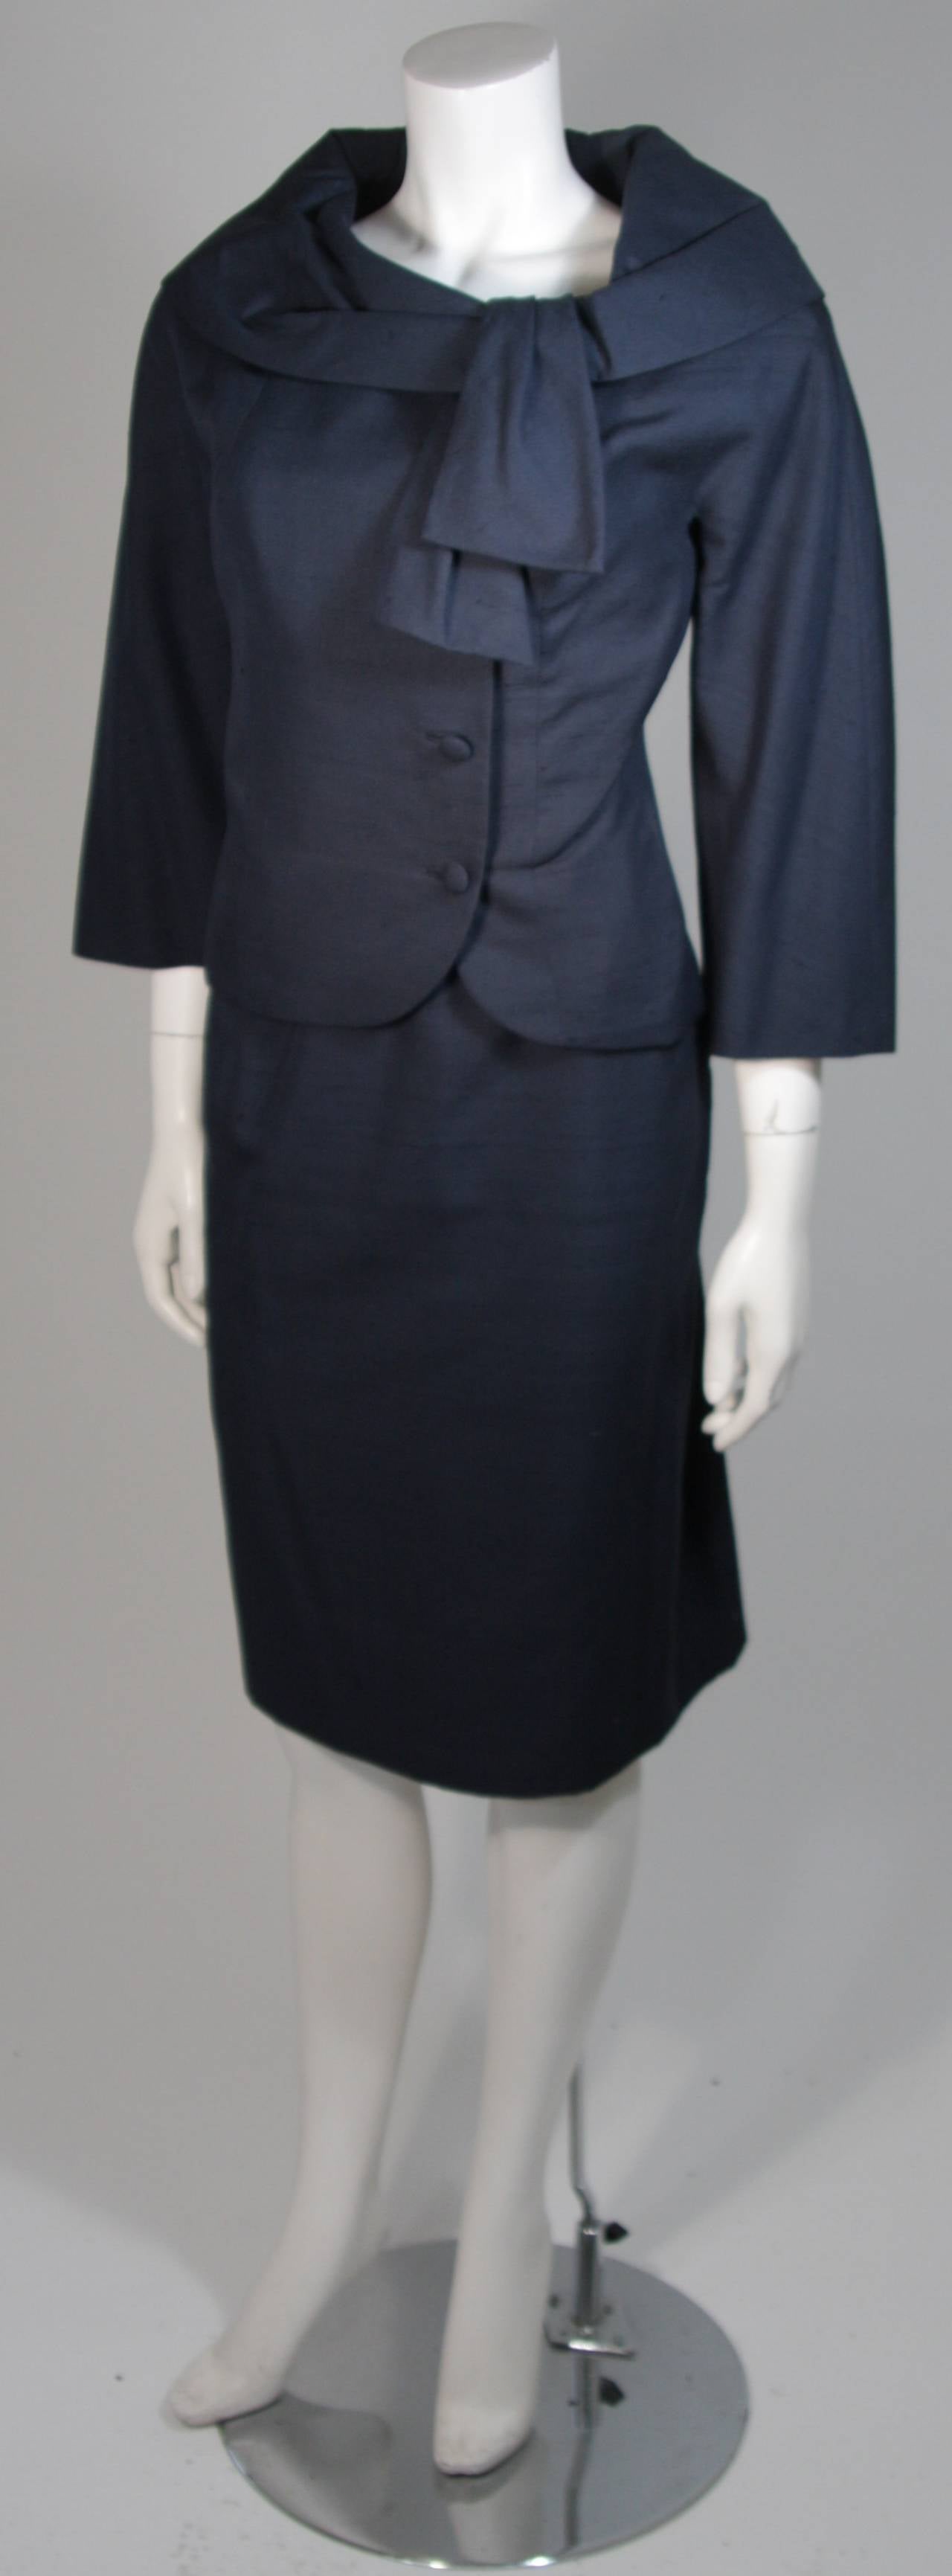 This fabulous Don Loper jacket, comprised of navy silk shantung, features a perfectly placed portrait collar, three-quarter length bracelet sleeves, and off-center covered buttons down the front. 
Matching navy silk pencil skirt. 
Both pieces are